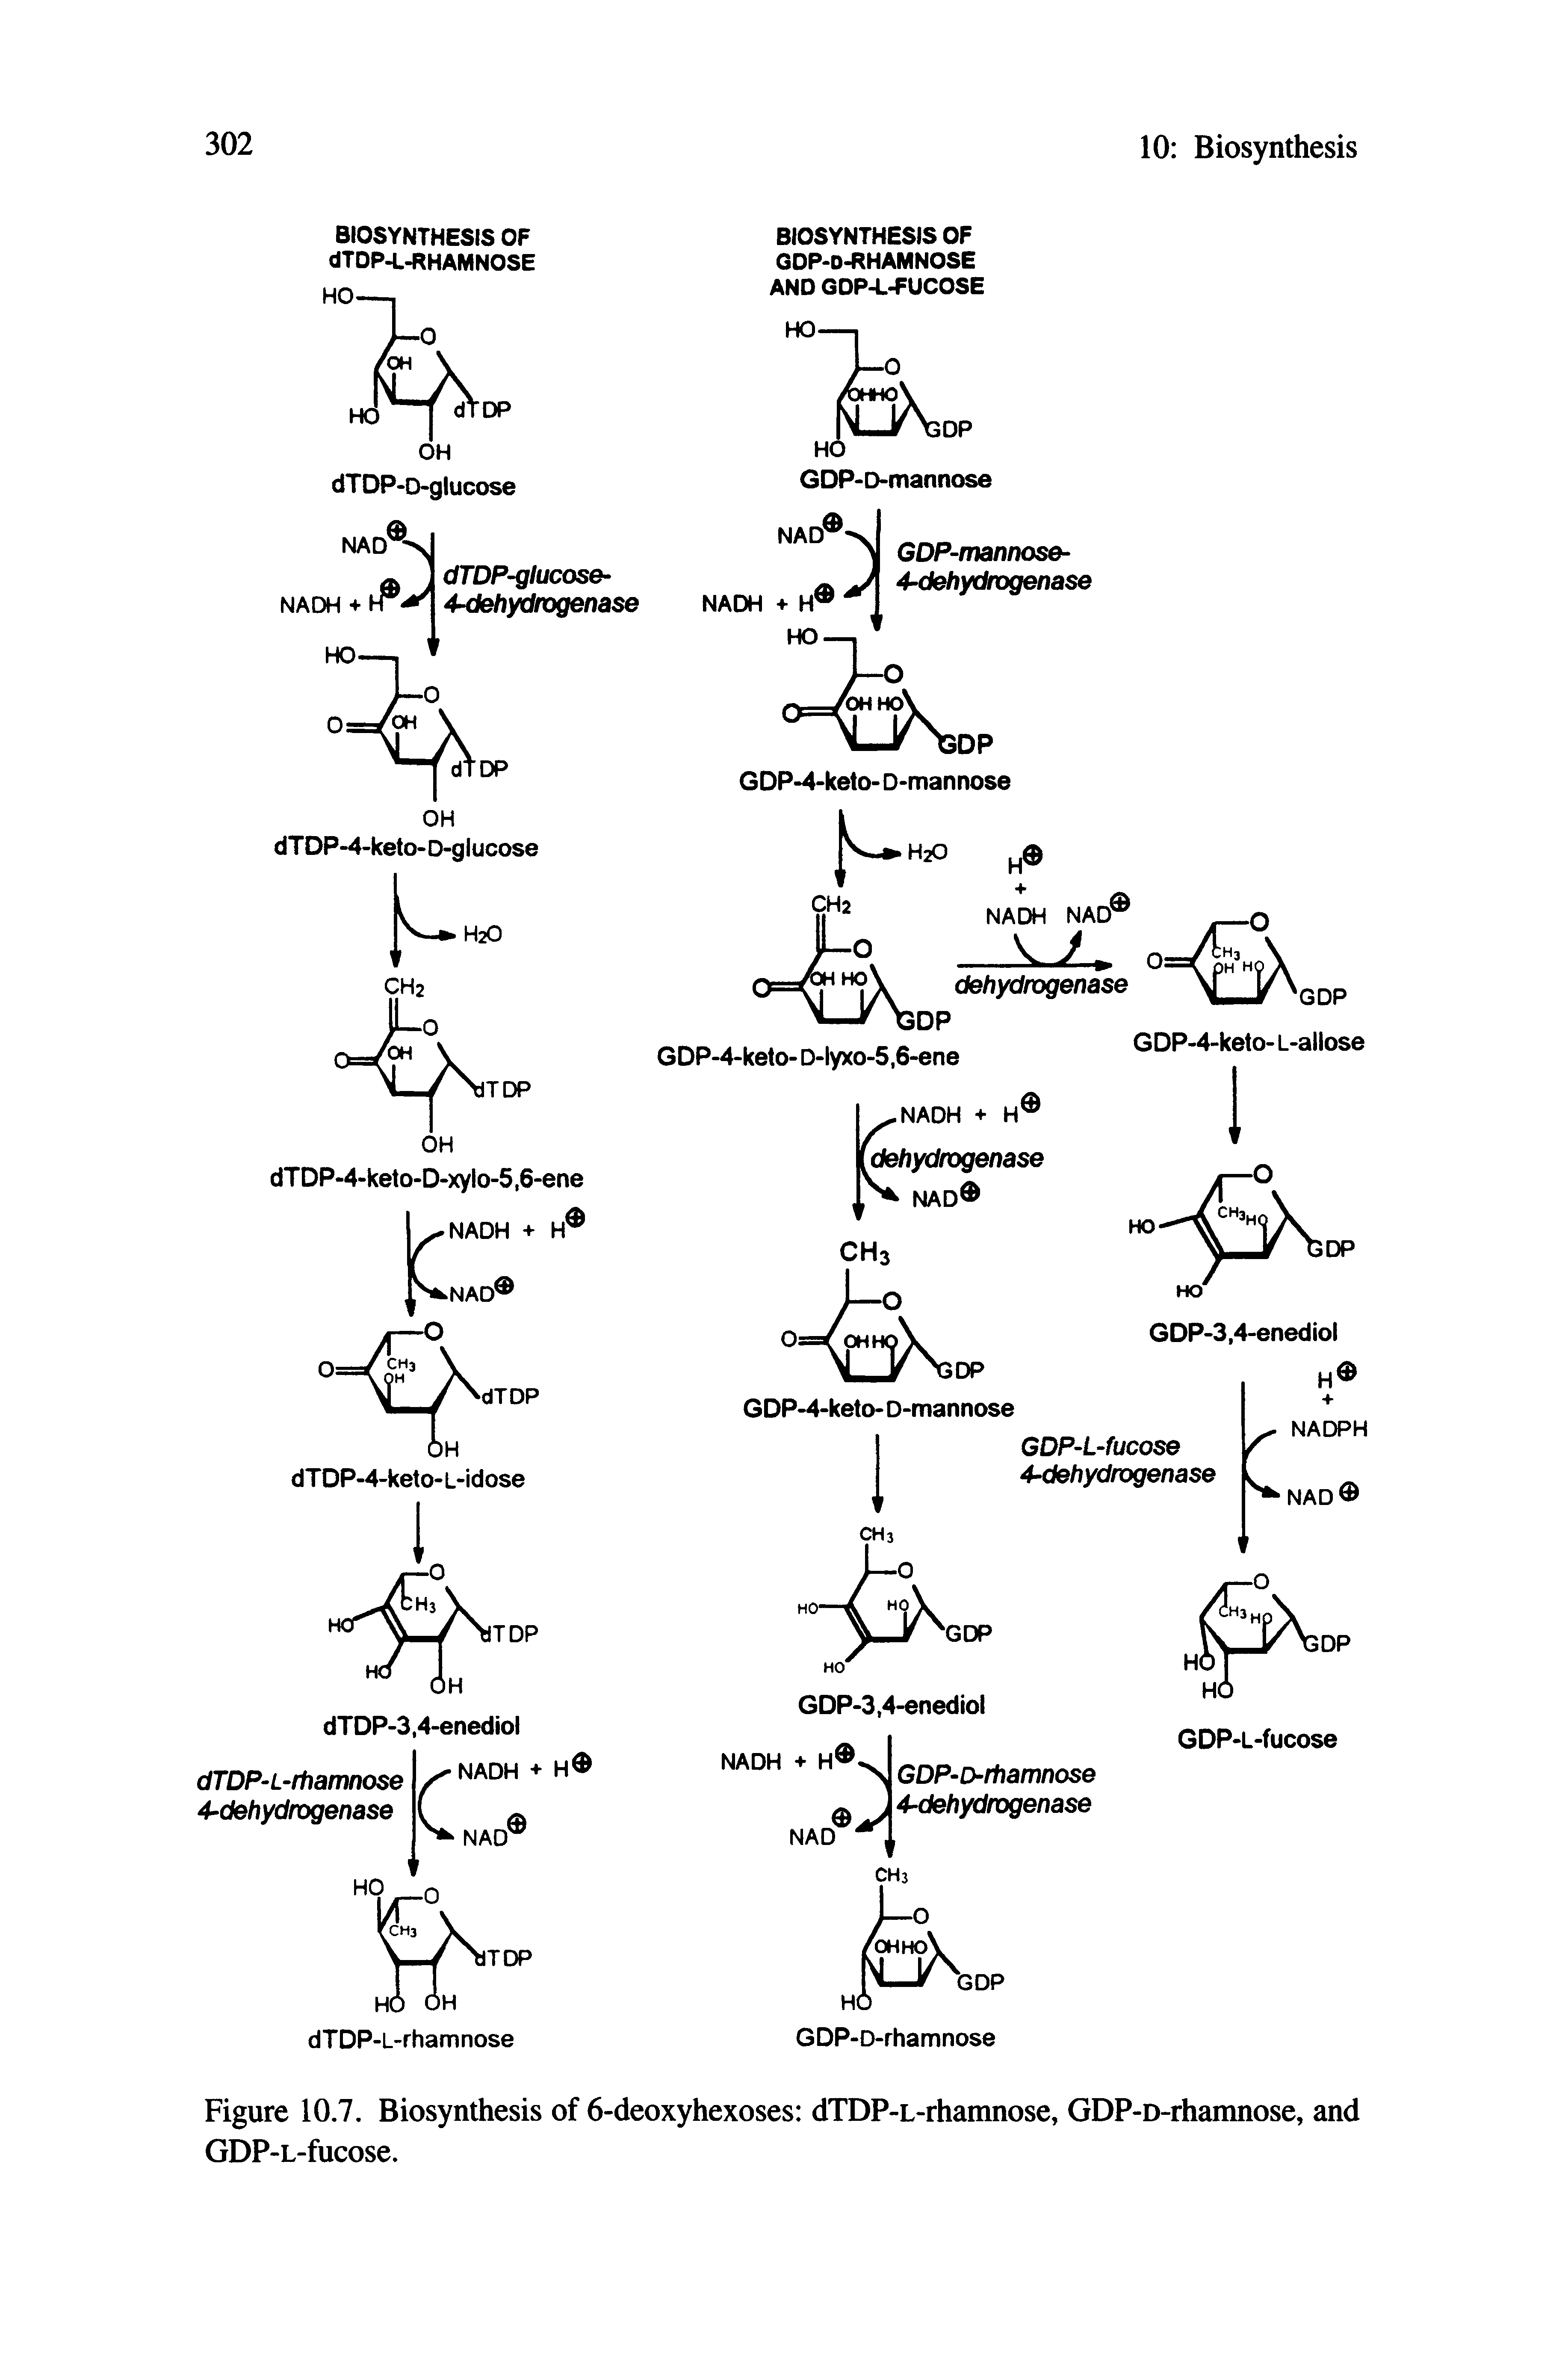 Figure 10.7. Biosynthesis of 6-deoxyhexoses dTDP-L-rhamnose, GDP-D-rhamnose, and GDP-L-fucose.